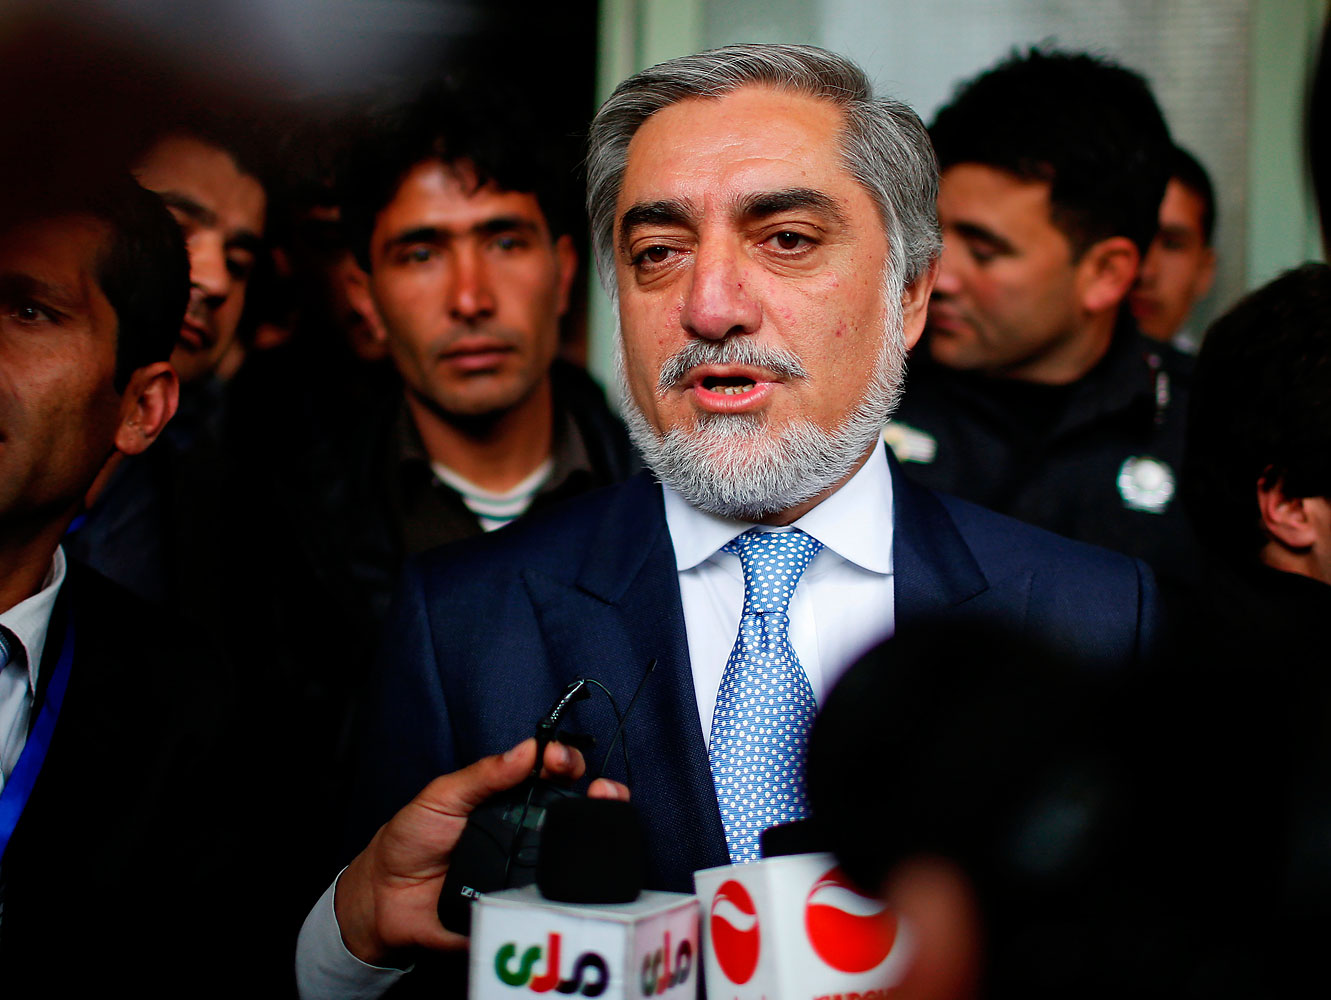 Afghan presidential candidate Abdullah Abdullah speaks to the media after voting at a polling station in Kabul on April 5, 2014 (Ahmad Masood—Reuters)